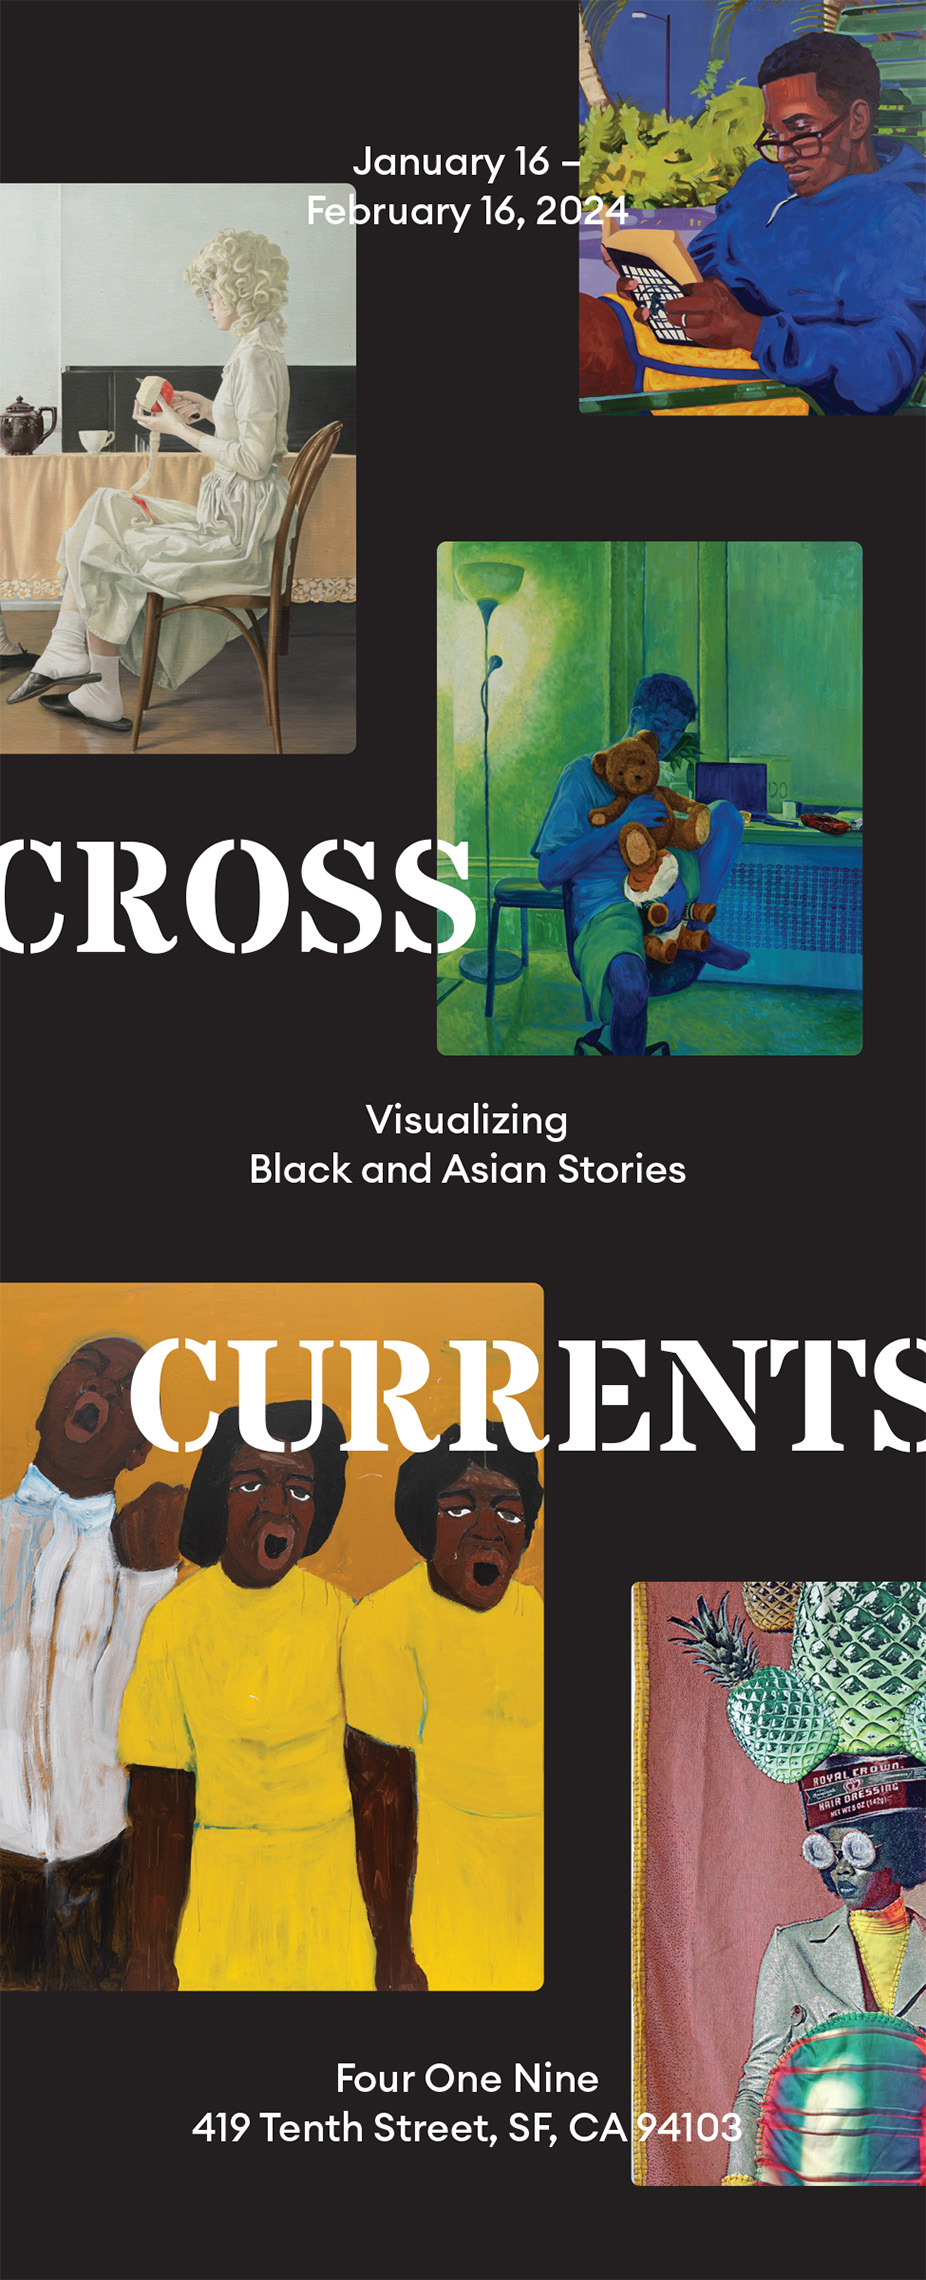 Cross Currents - a group exhibition visualizing Black and Asian stories